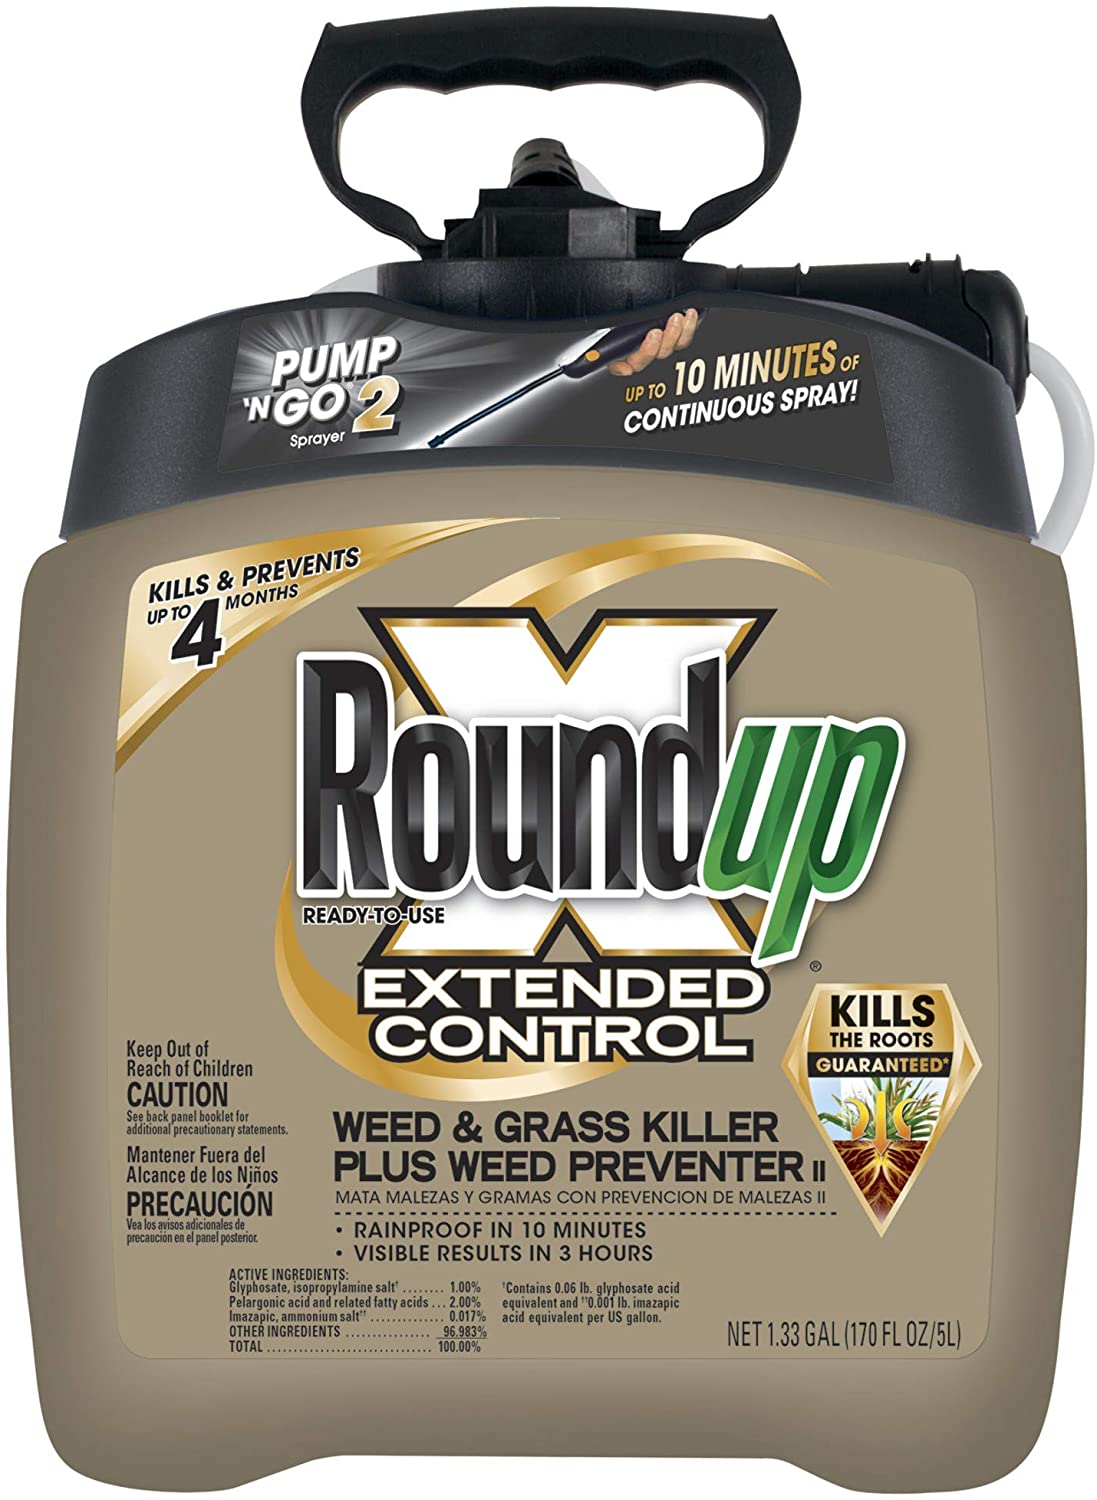 Roundup Ready-To-Use Extended Control Weed & Grass Killer